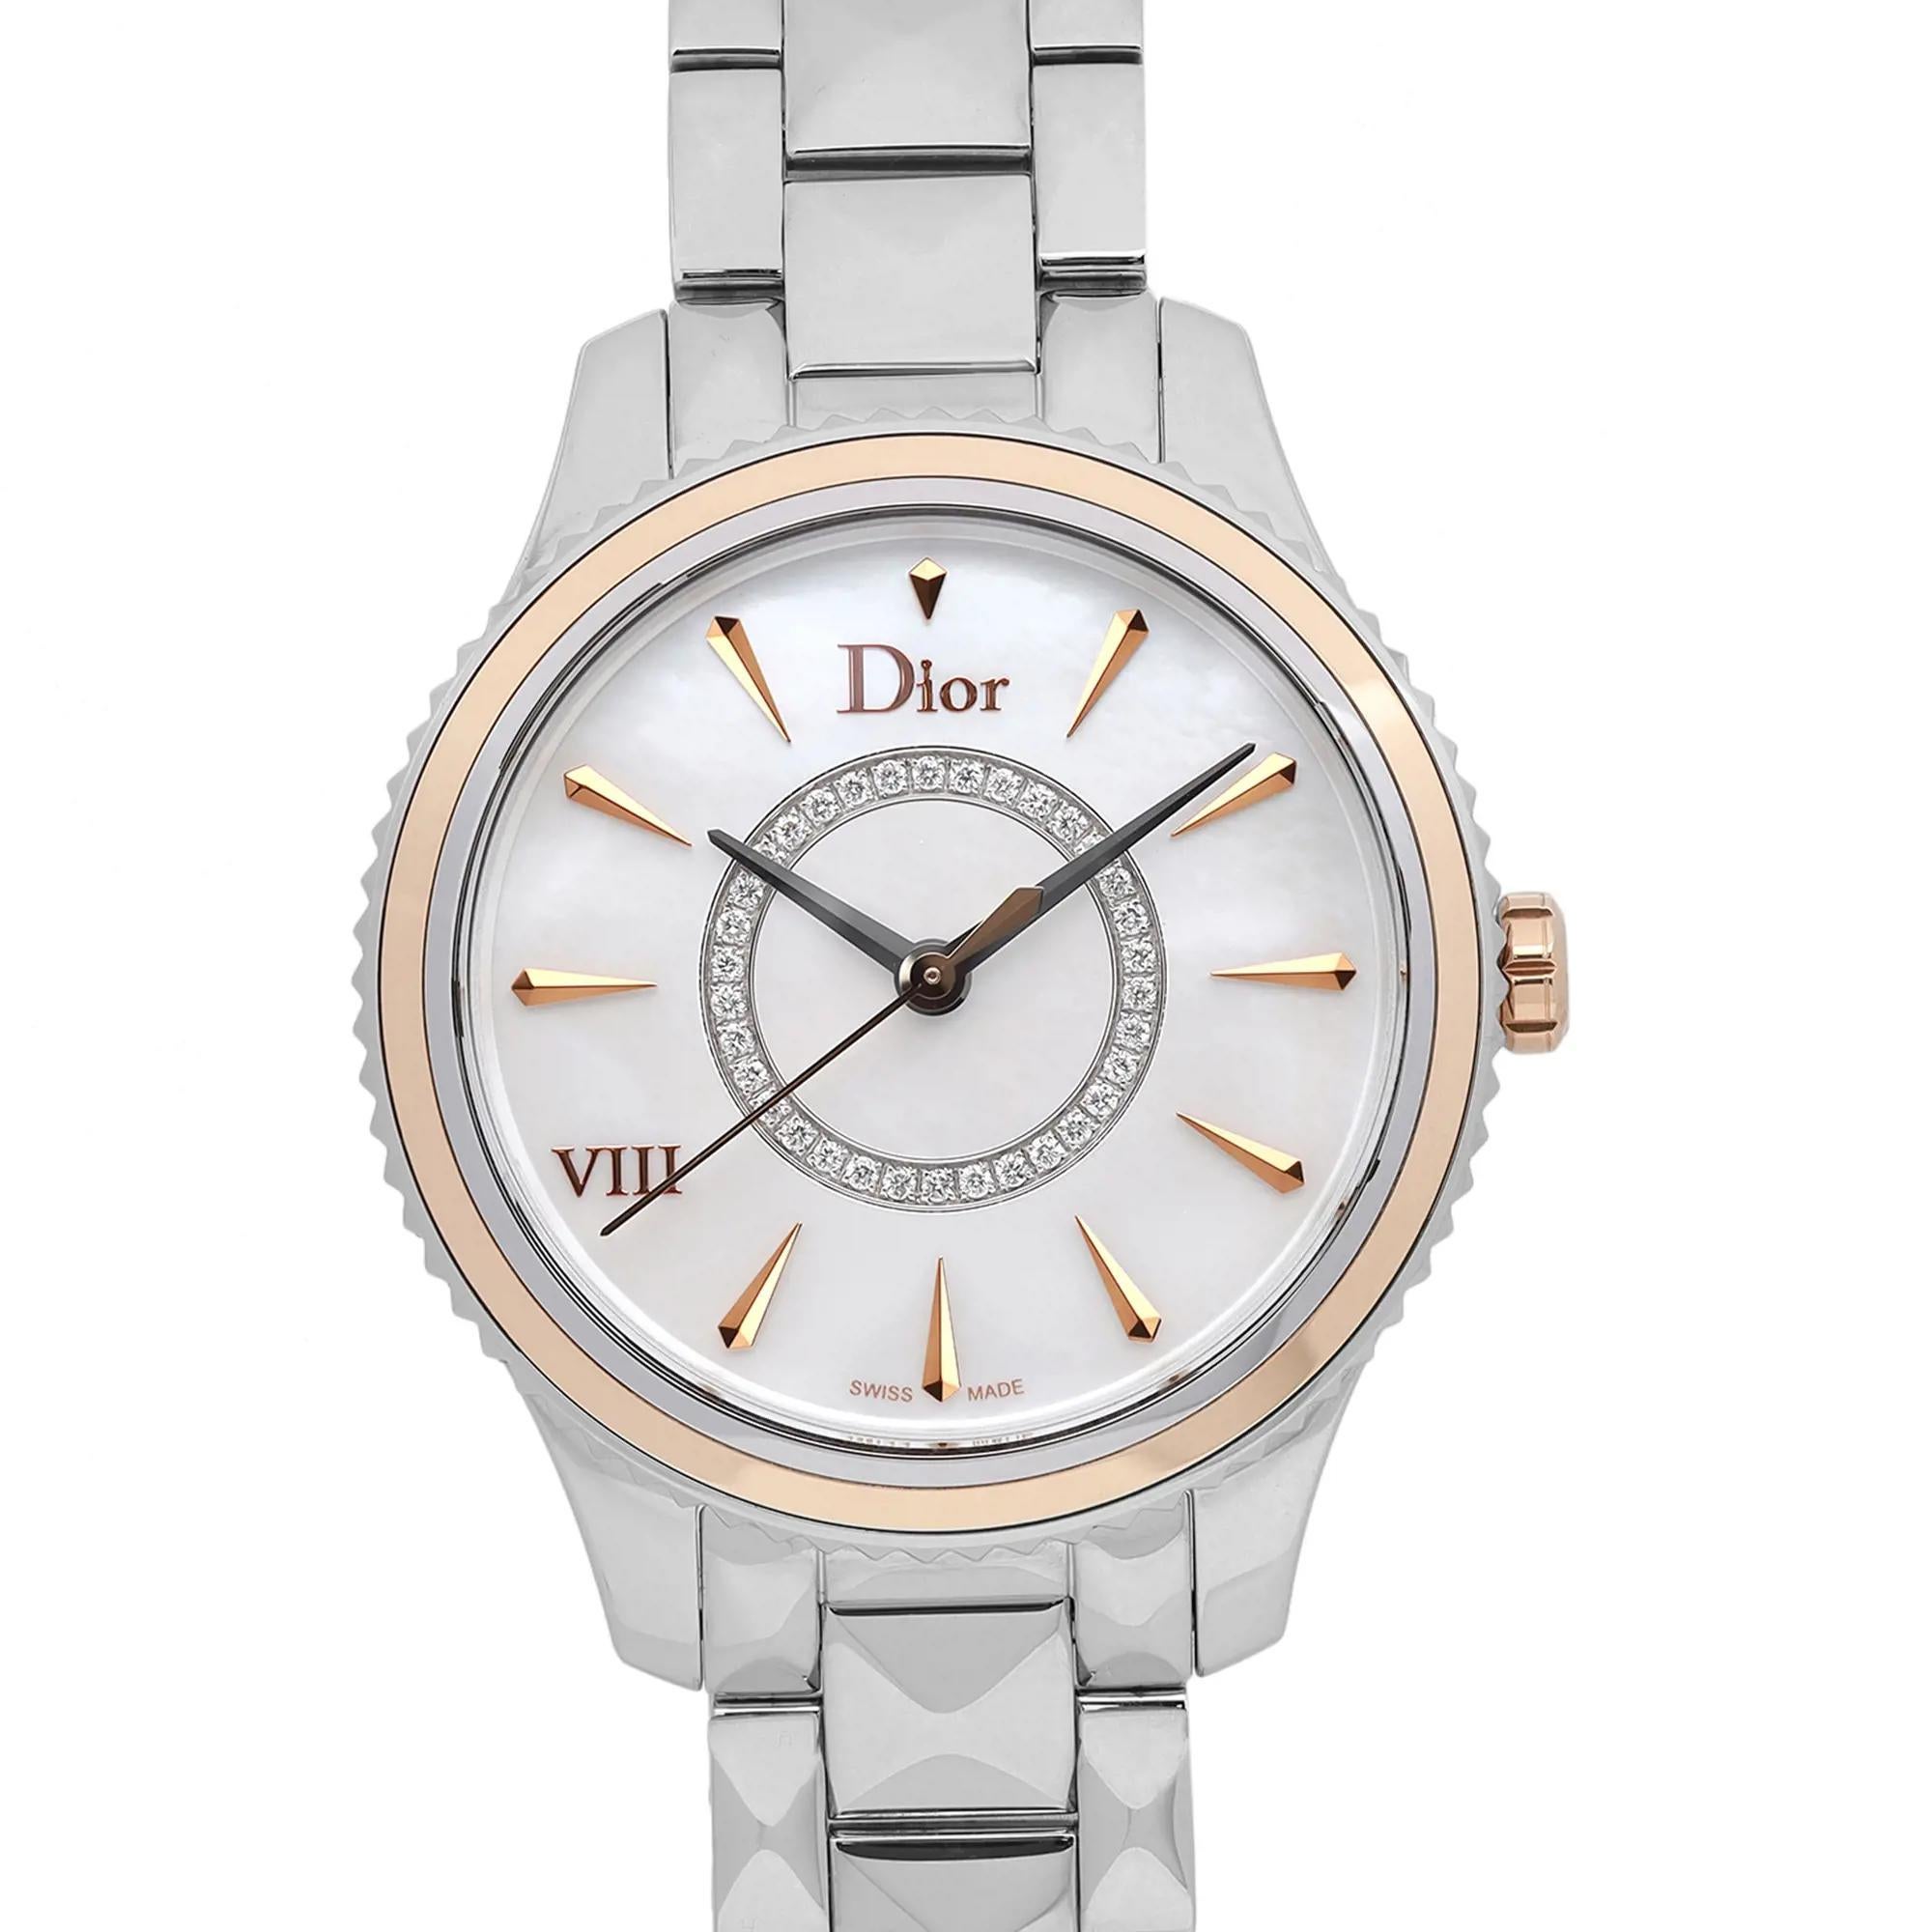 Excellent condition. Minor scratches on the bracelet. The original box and paper are not included.

 Brand: Dior  Type: Wristwatch  Department: Women  Model Number: CD1521I0M001  Country/Region of Manufacture: Switzerland  Style: Casual  Model: